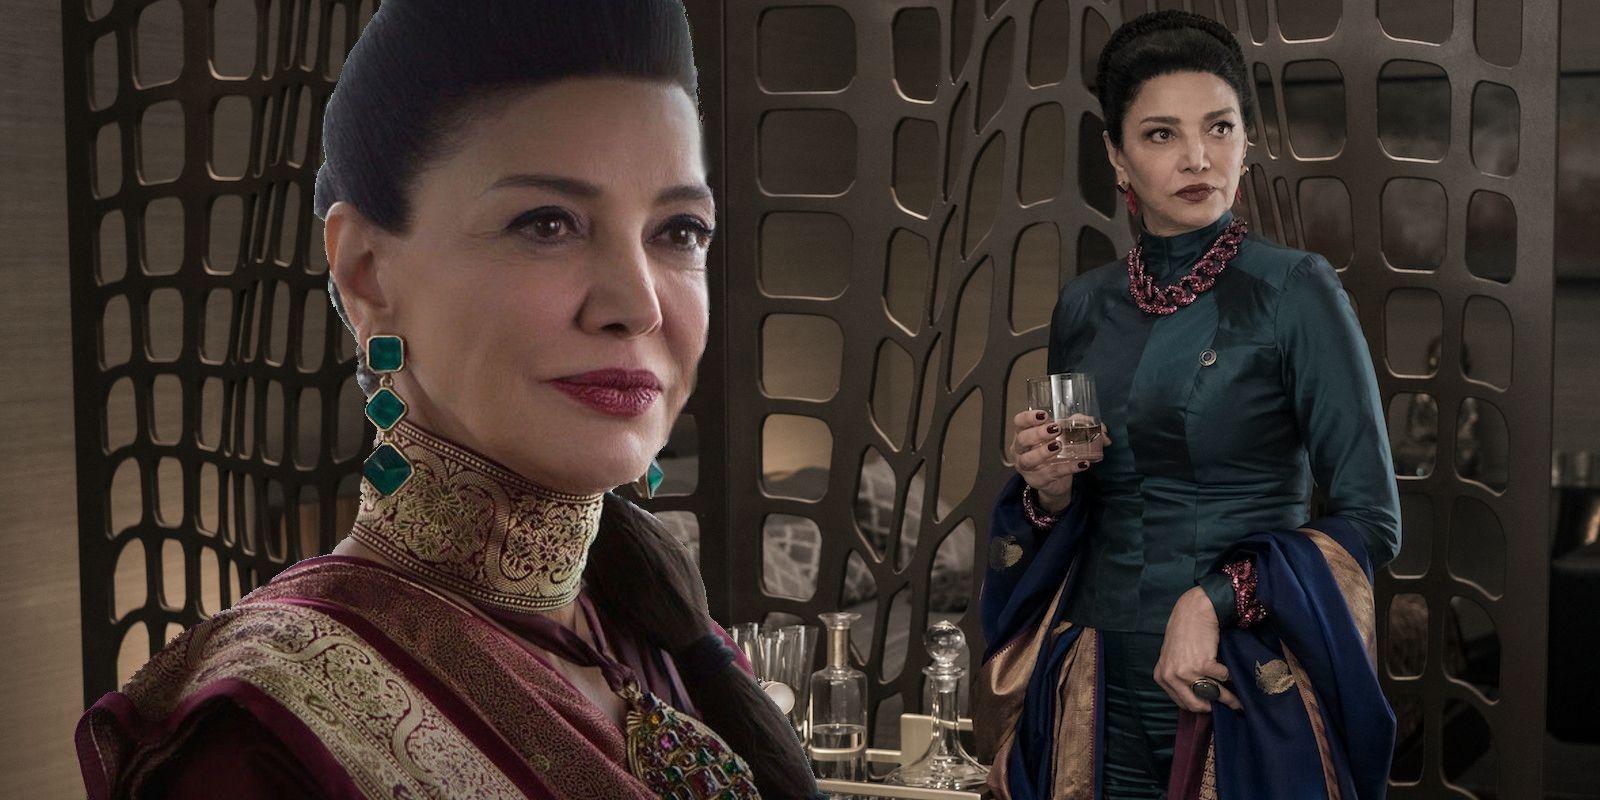 The Expanse Season 4 Avasarala Is The Best Change From The Books